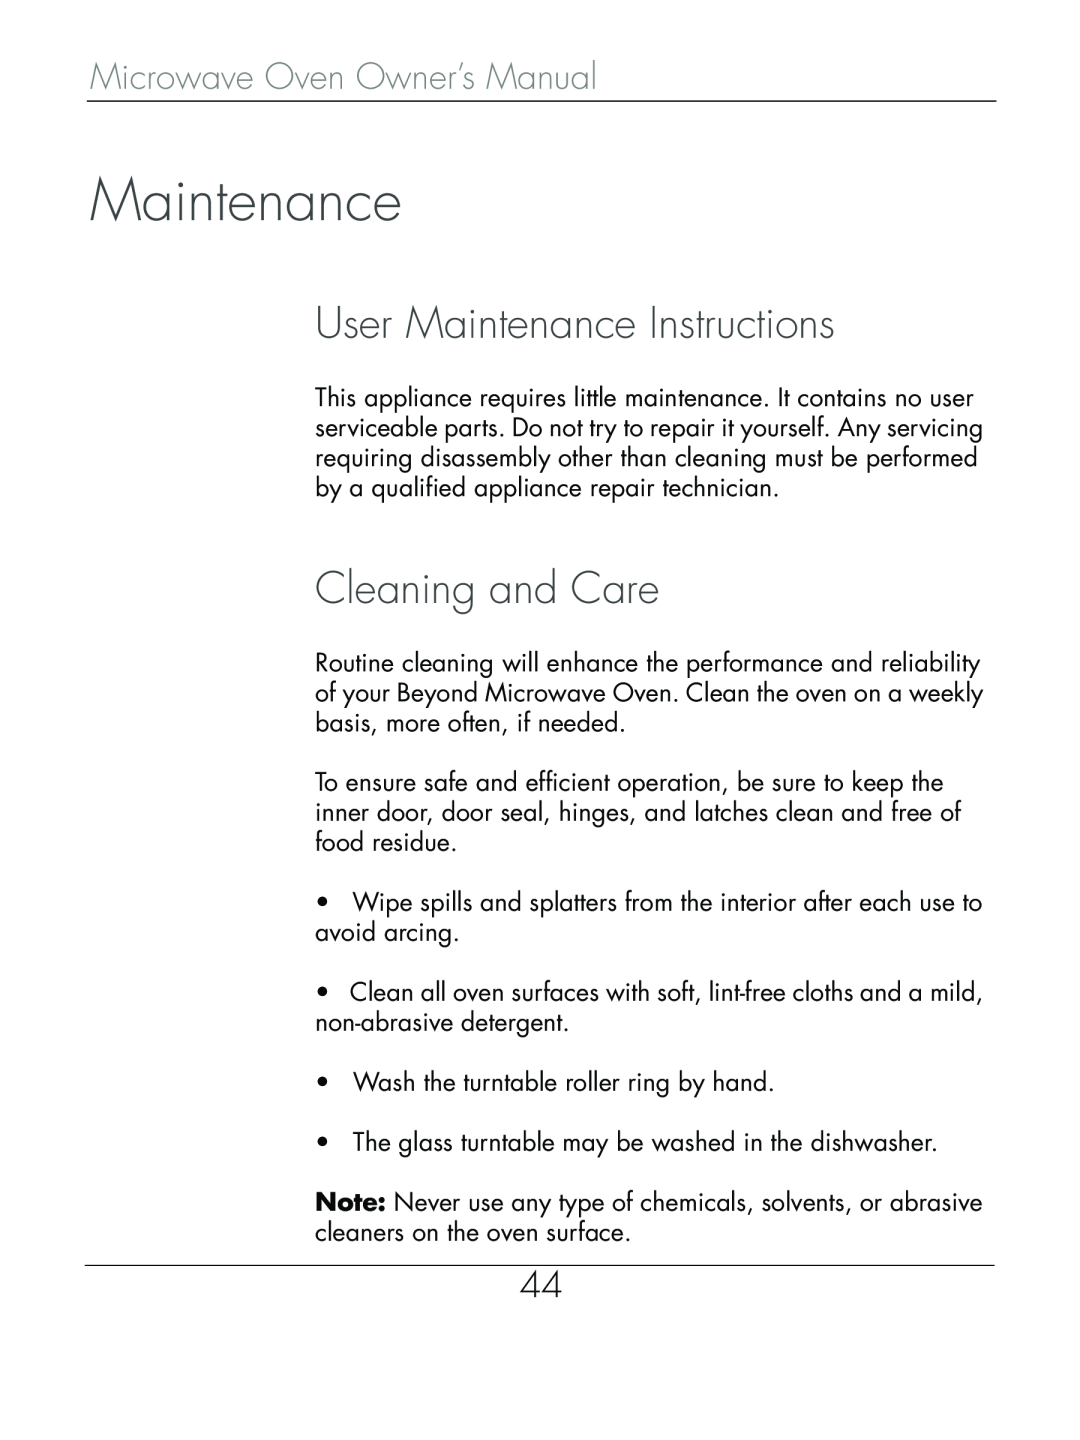 Beyond Microwace Oven manual User Maintenance Instructions, Cleaning and Care, Microwave Oven Owner’s Manual 